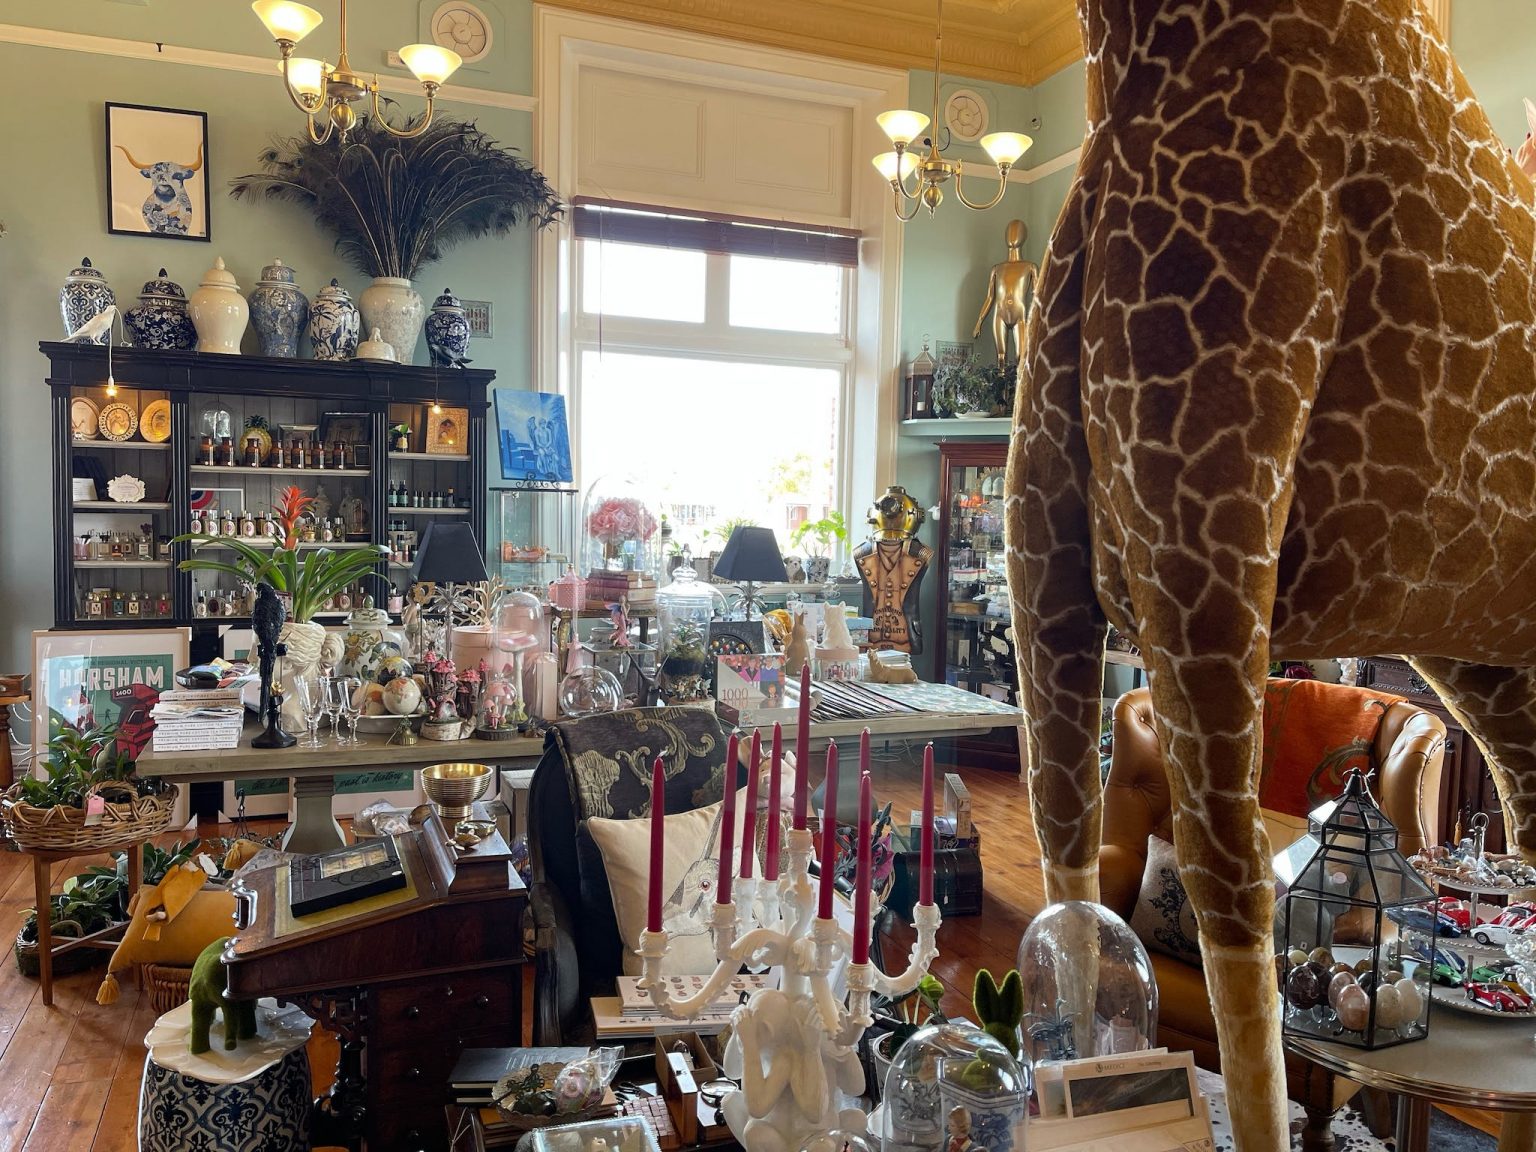 3.7 metre giraffe stands in the middle of the gift shop.